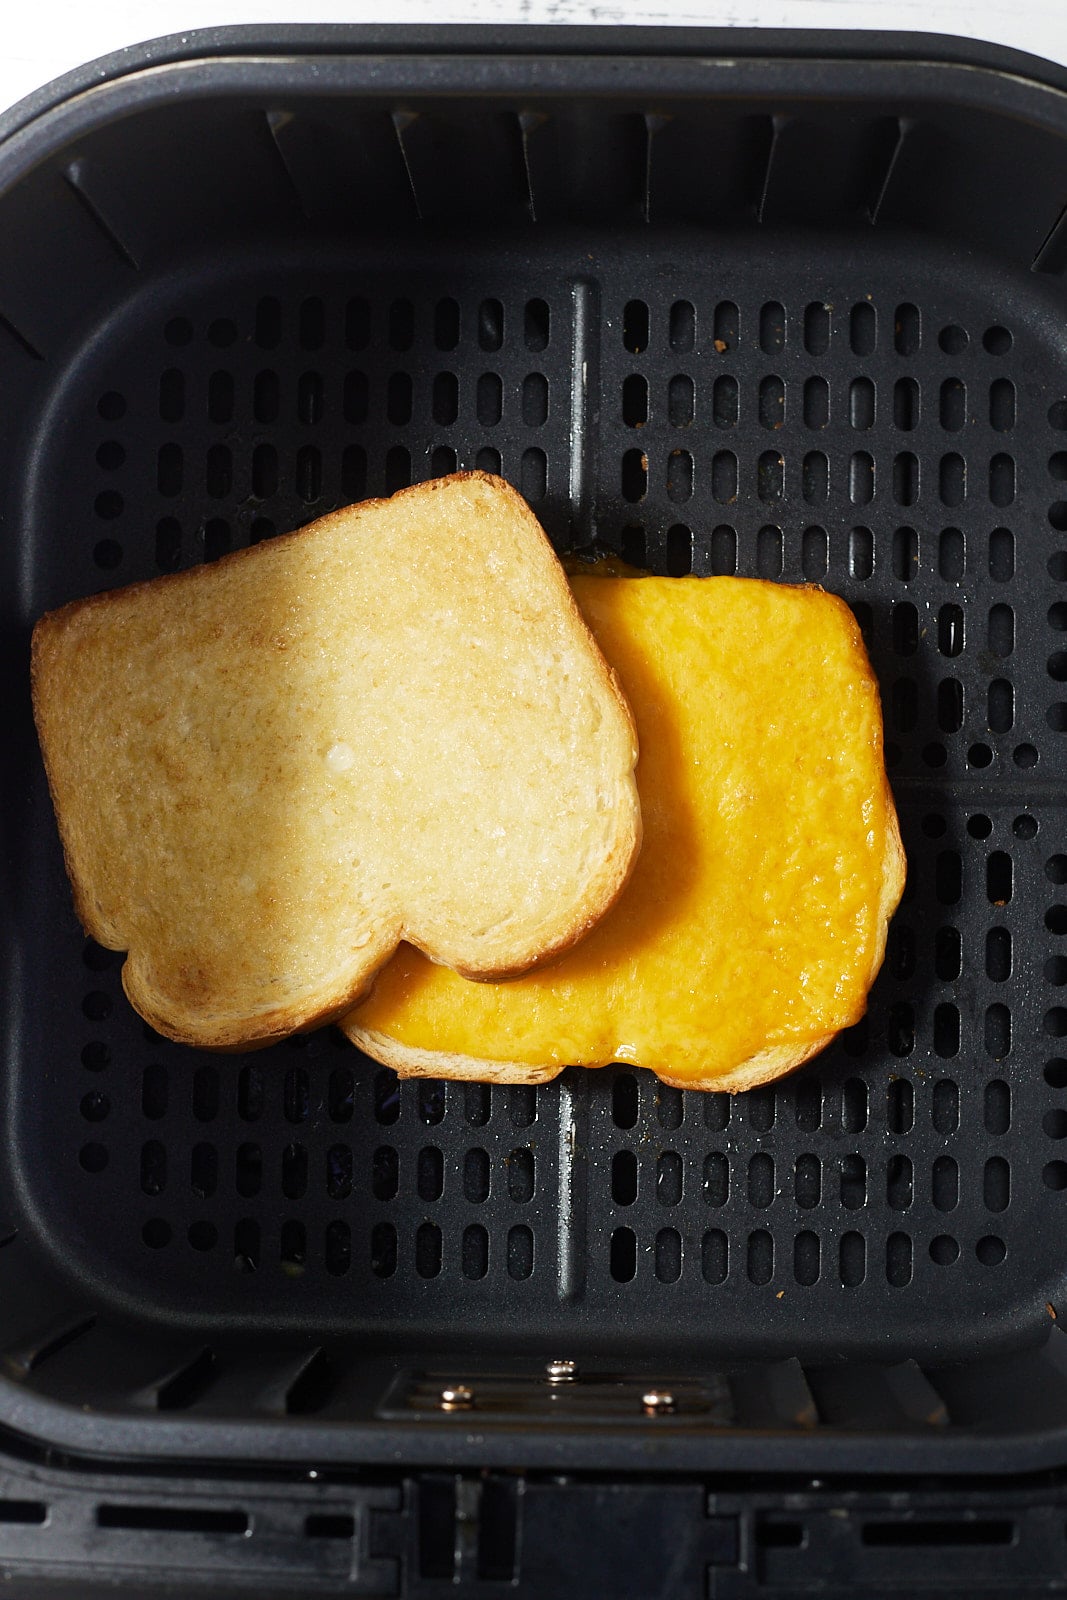 Once slice of bread on top of cheese on a piece of bread in an air fryer.